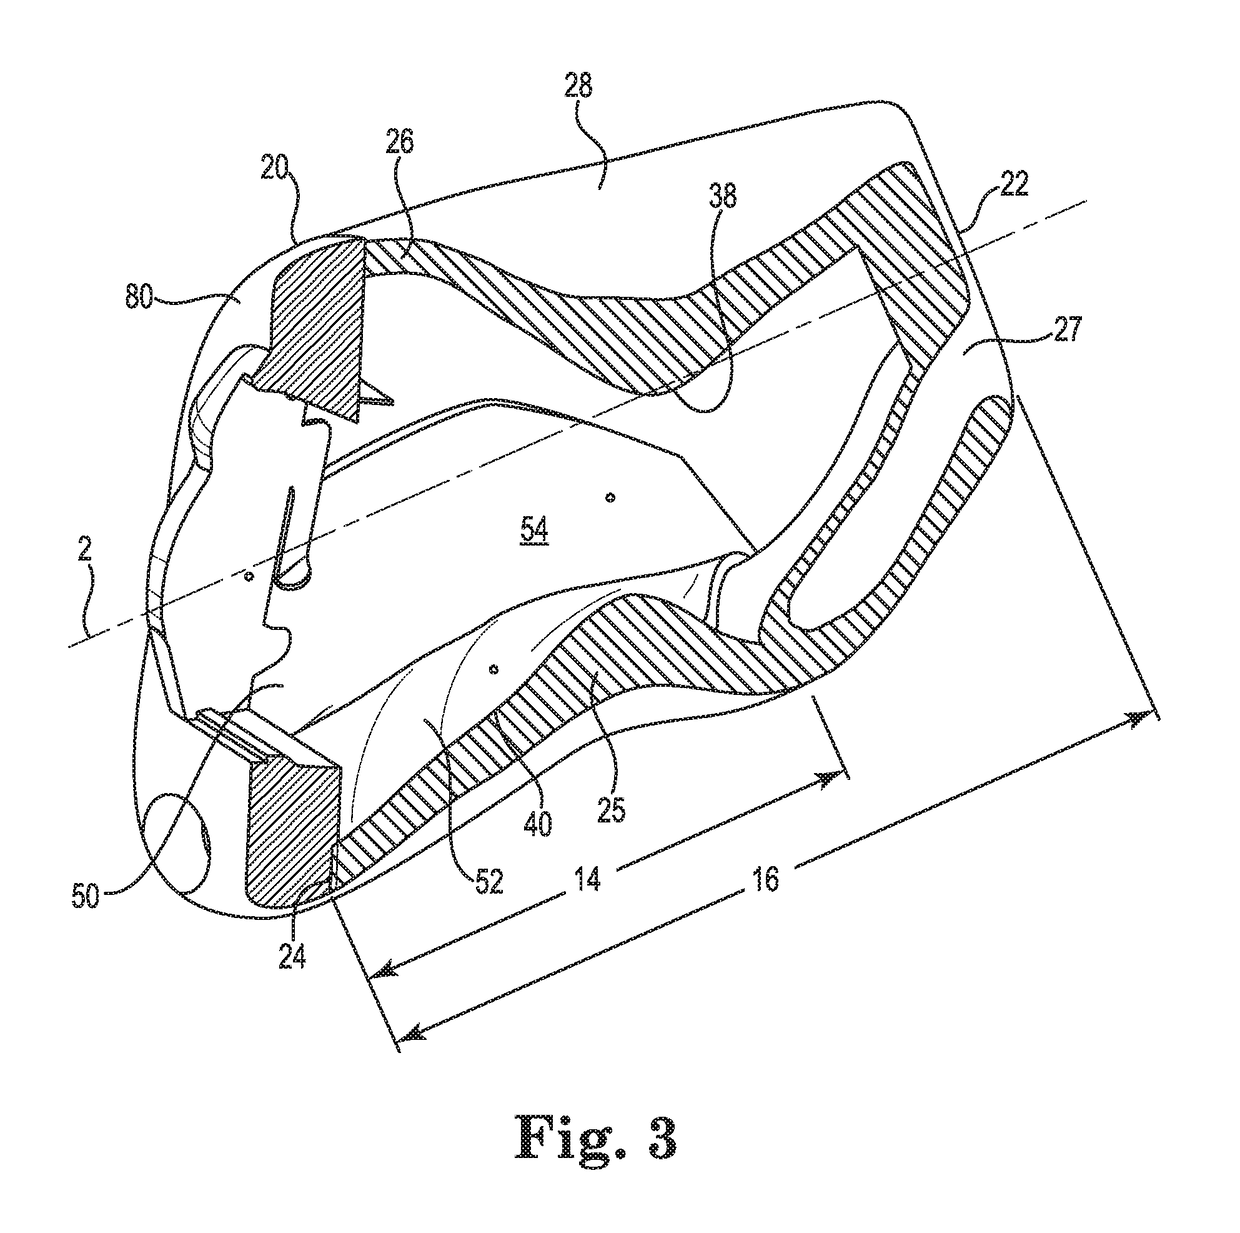 Hearing assistance device